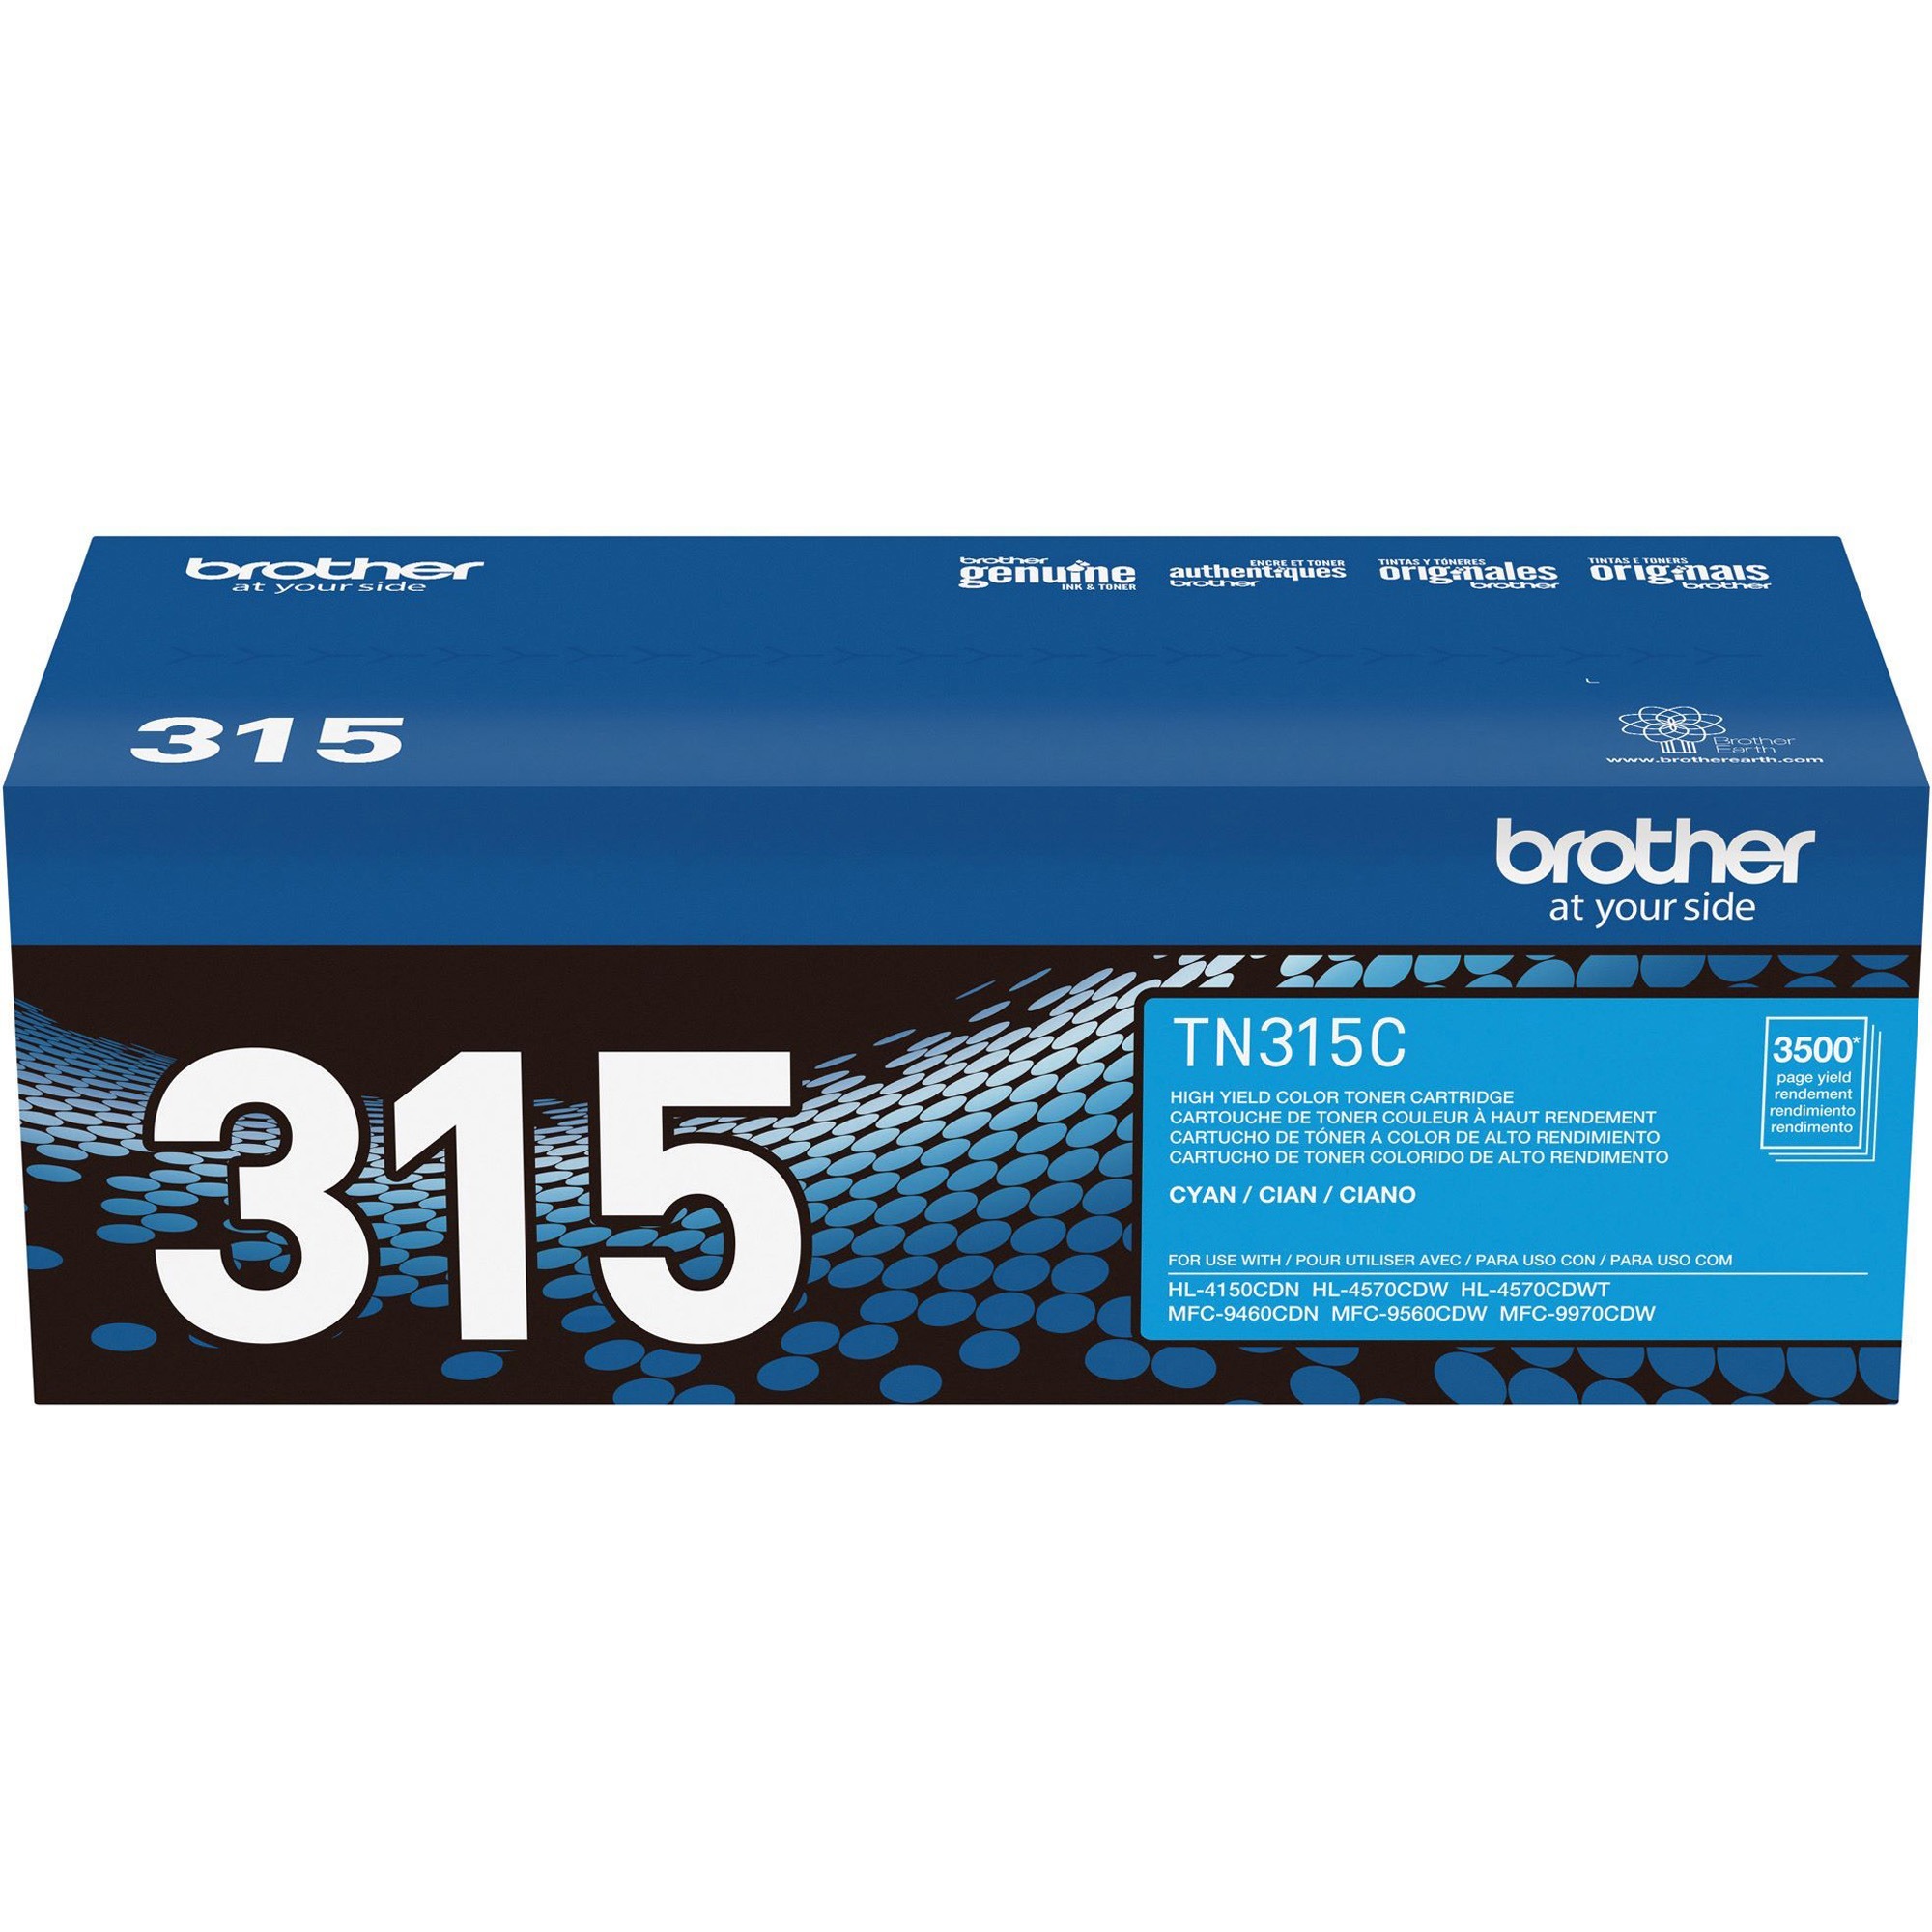 brother | S&K Office Products, Inc.